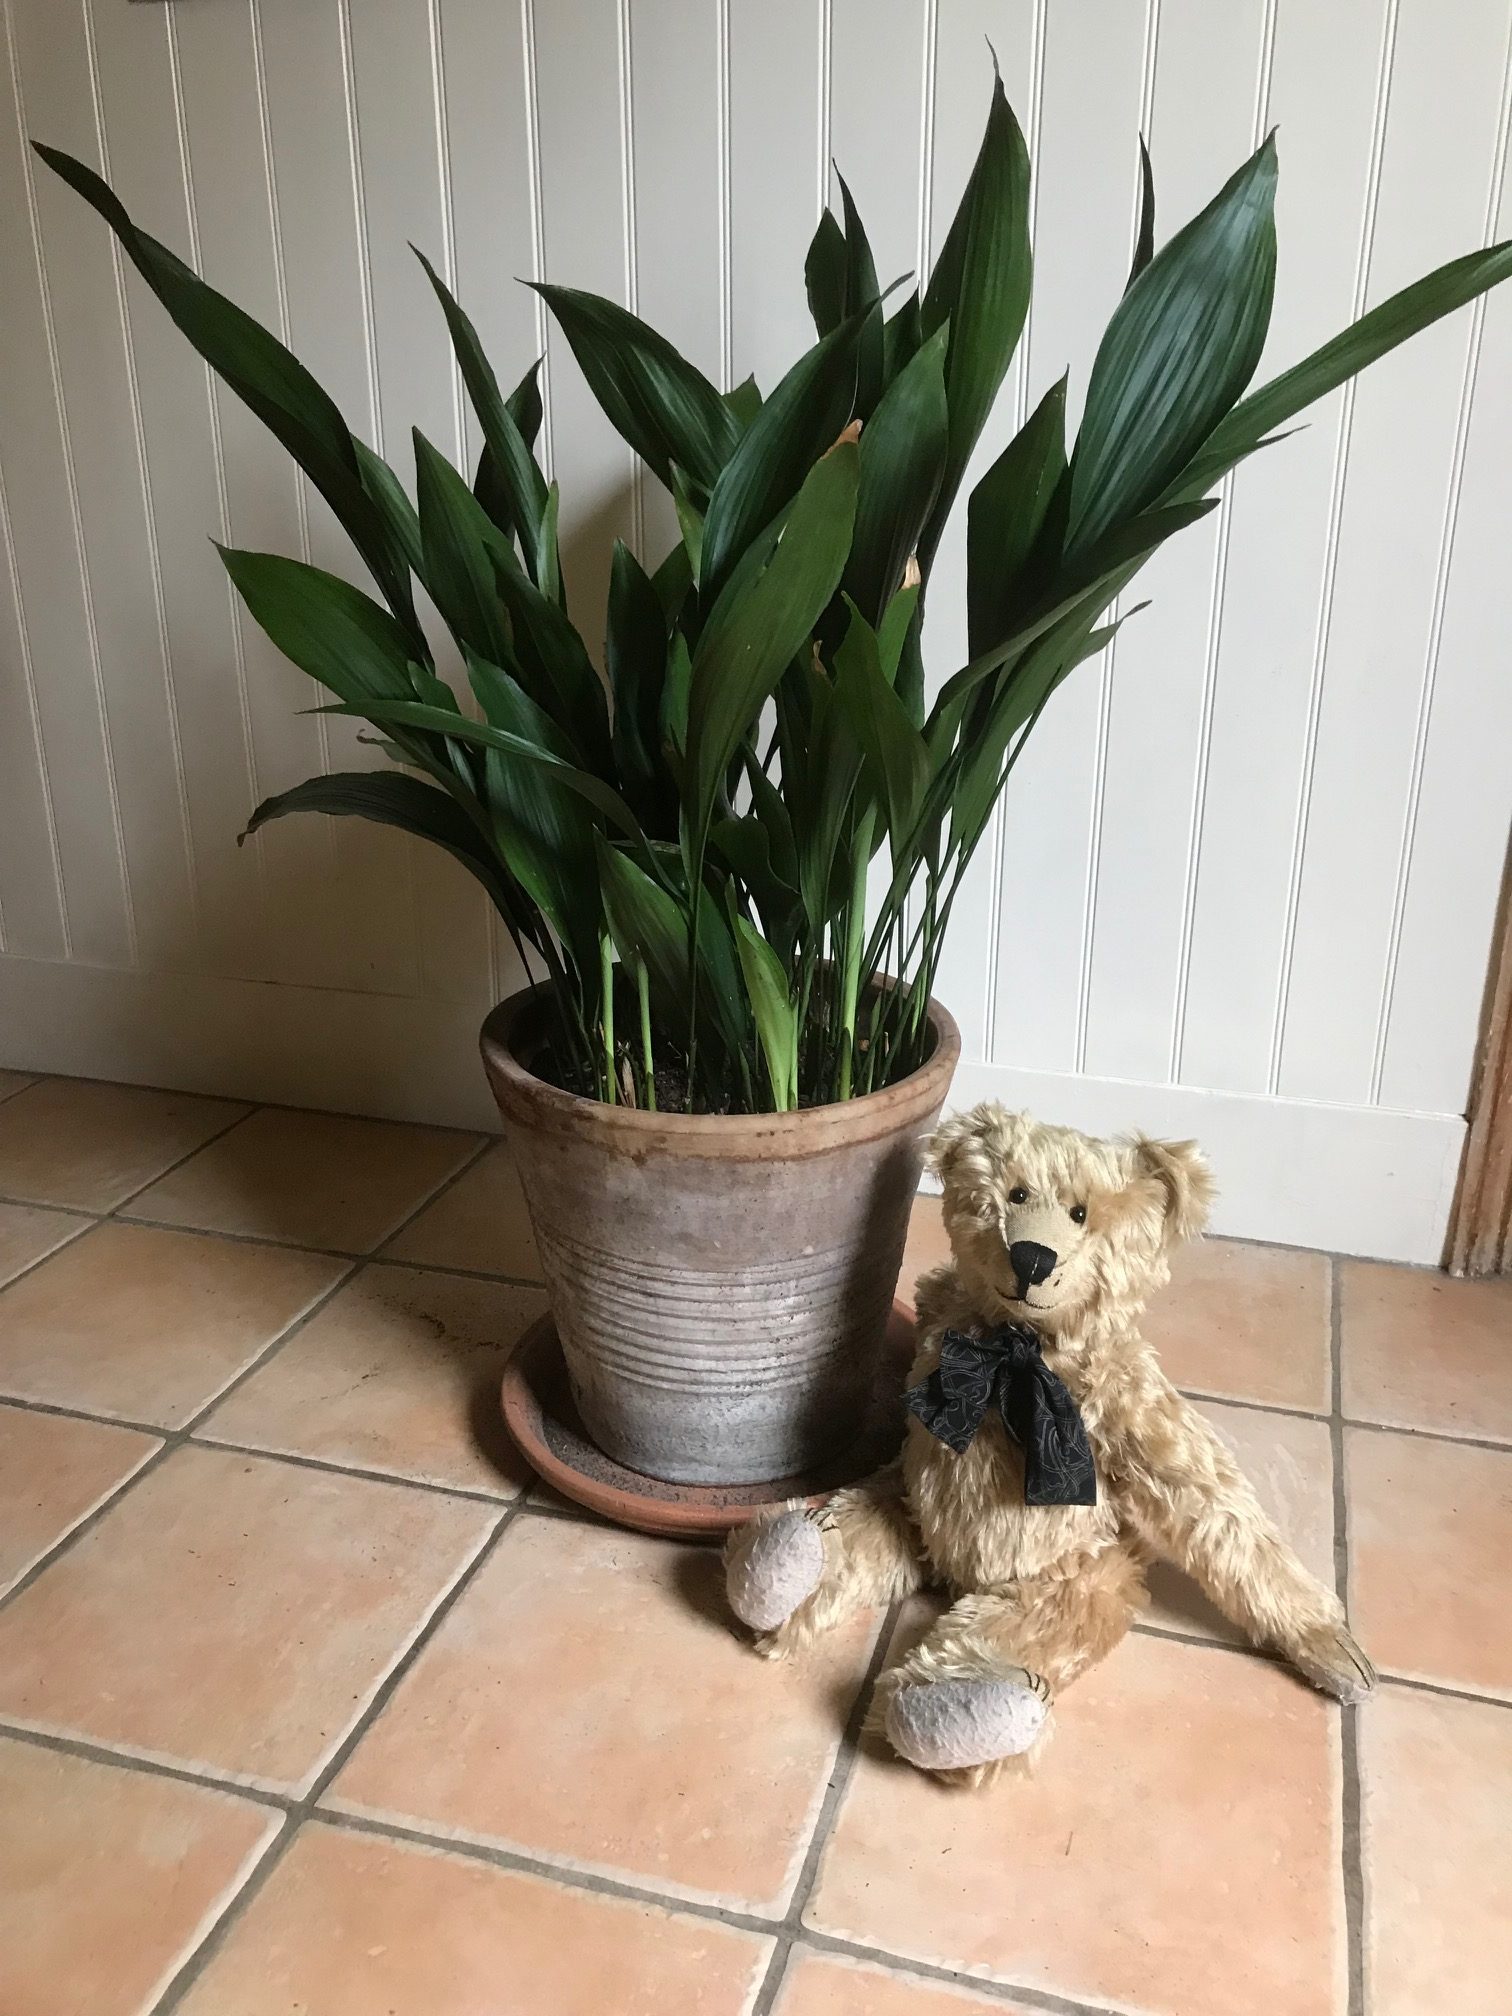 Aspidistra: Looks good from this side too!